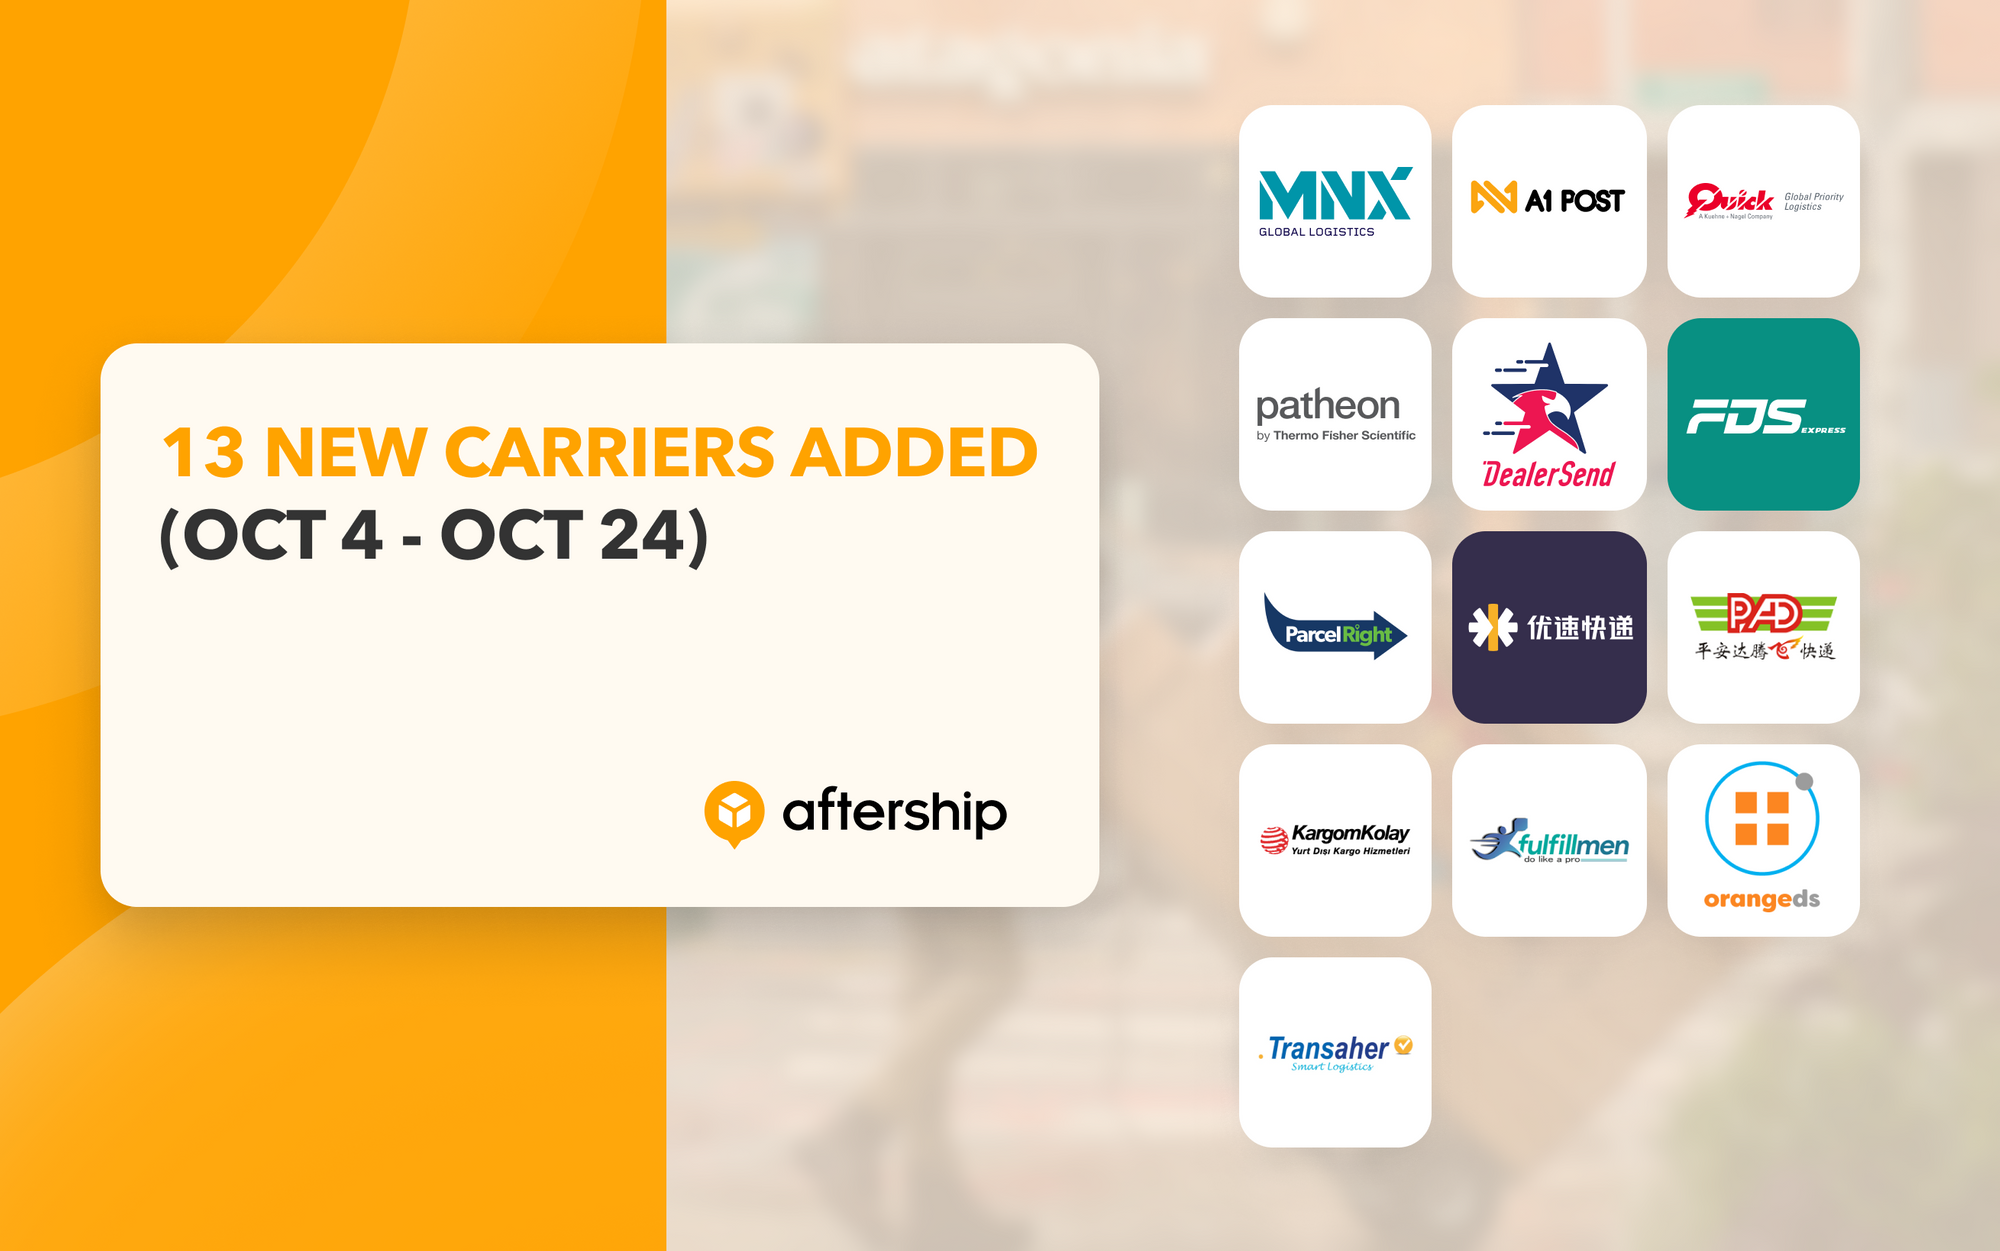 AfterShip adds 13 new couriers in the last three weeks (4th to 24th October 2021)